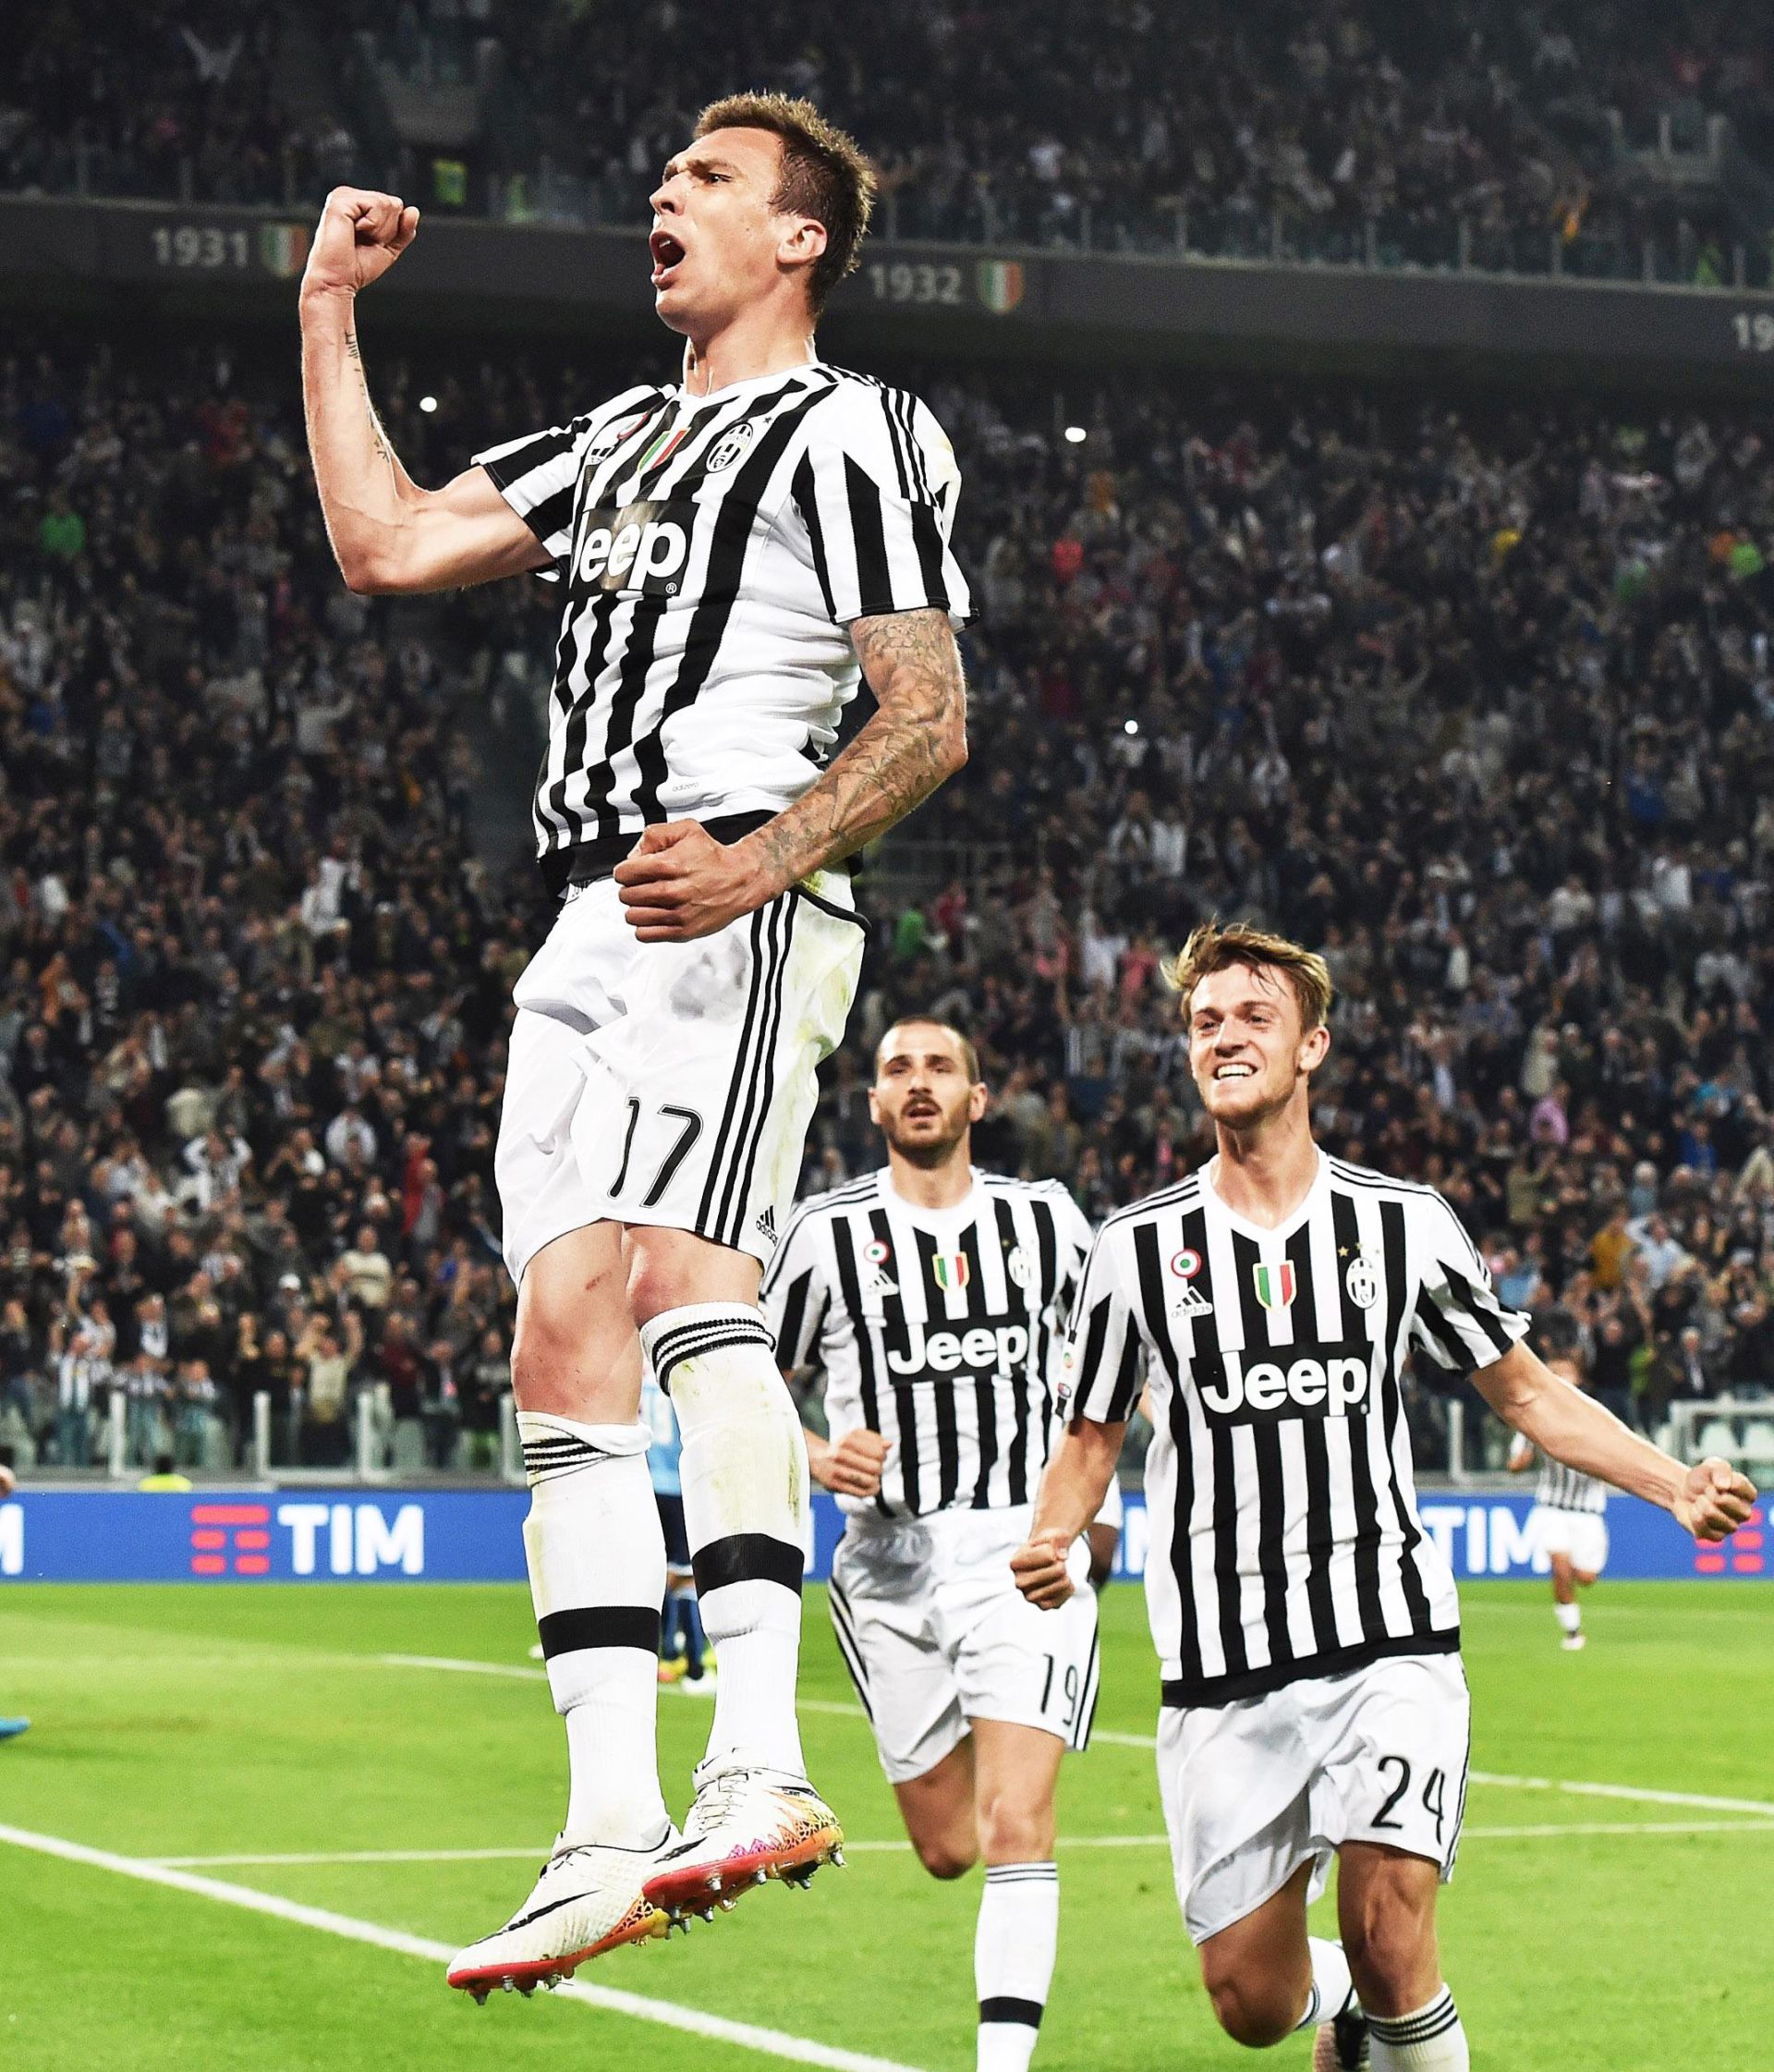 epa05269265 Juventus' forward Mario Mandzukic (L) celebrates with his teammates after scoring the 1-0 lead during the Italian Serie A soccer match between Juventus FC and SS Lazio at Juventus Stadium in Turin, Italy, 20 April 2016.  EPA/ALESSANDRO DI MARCO